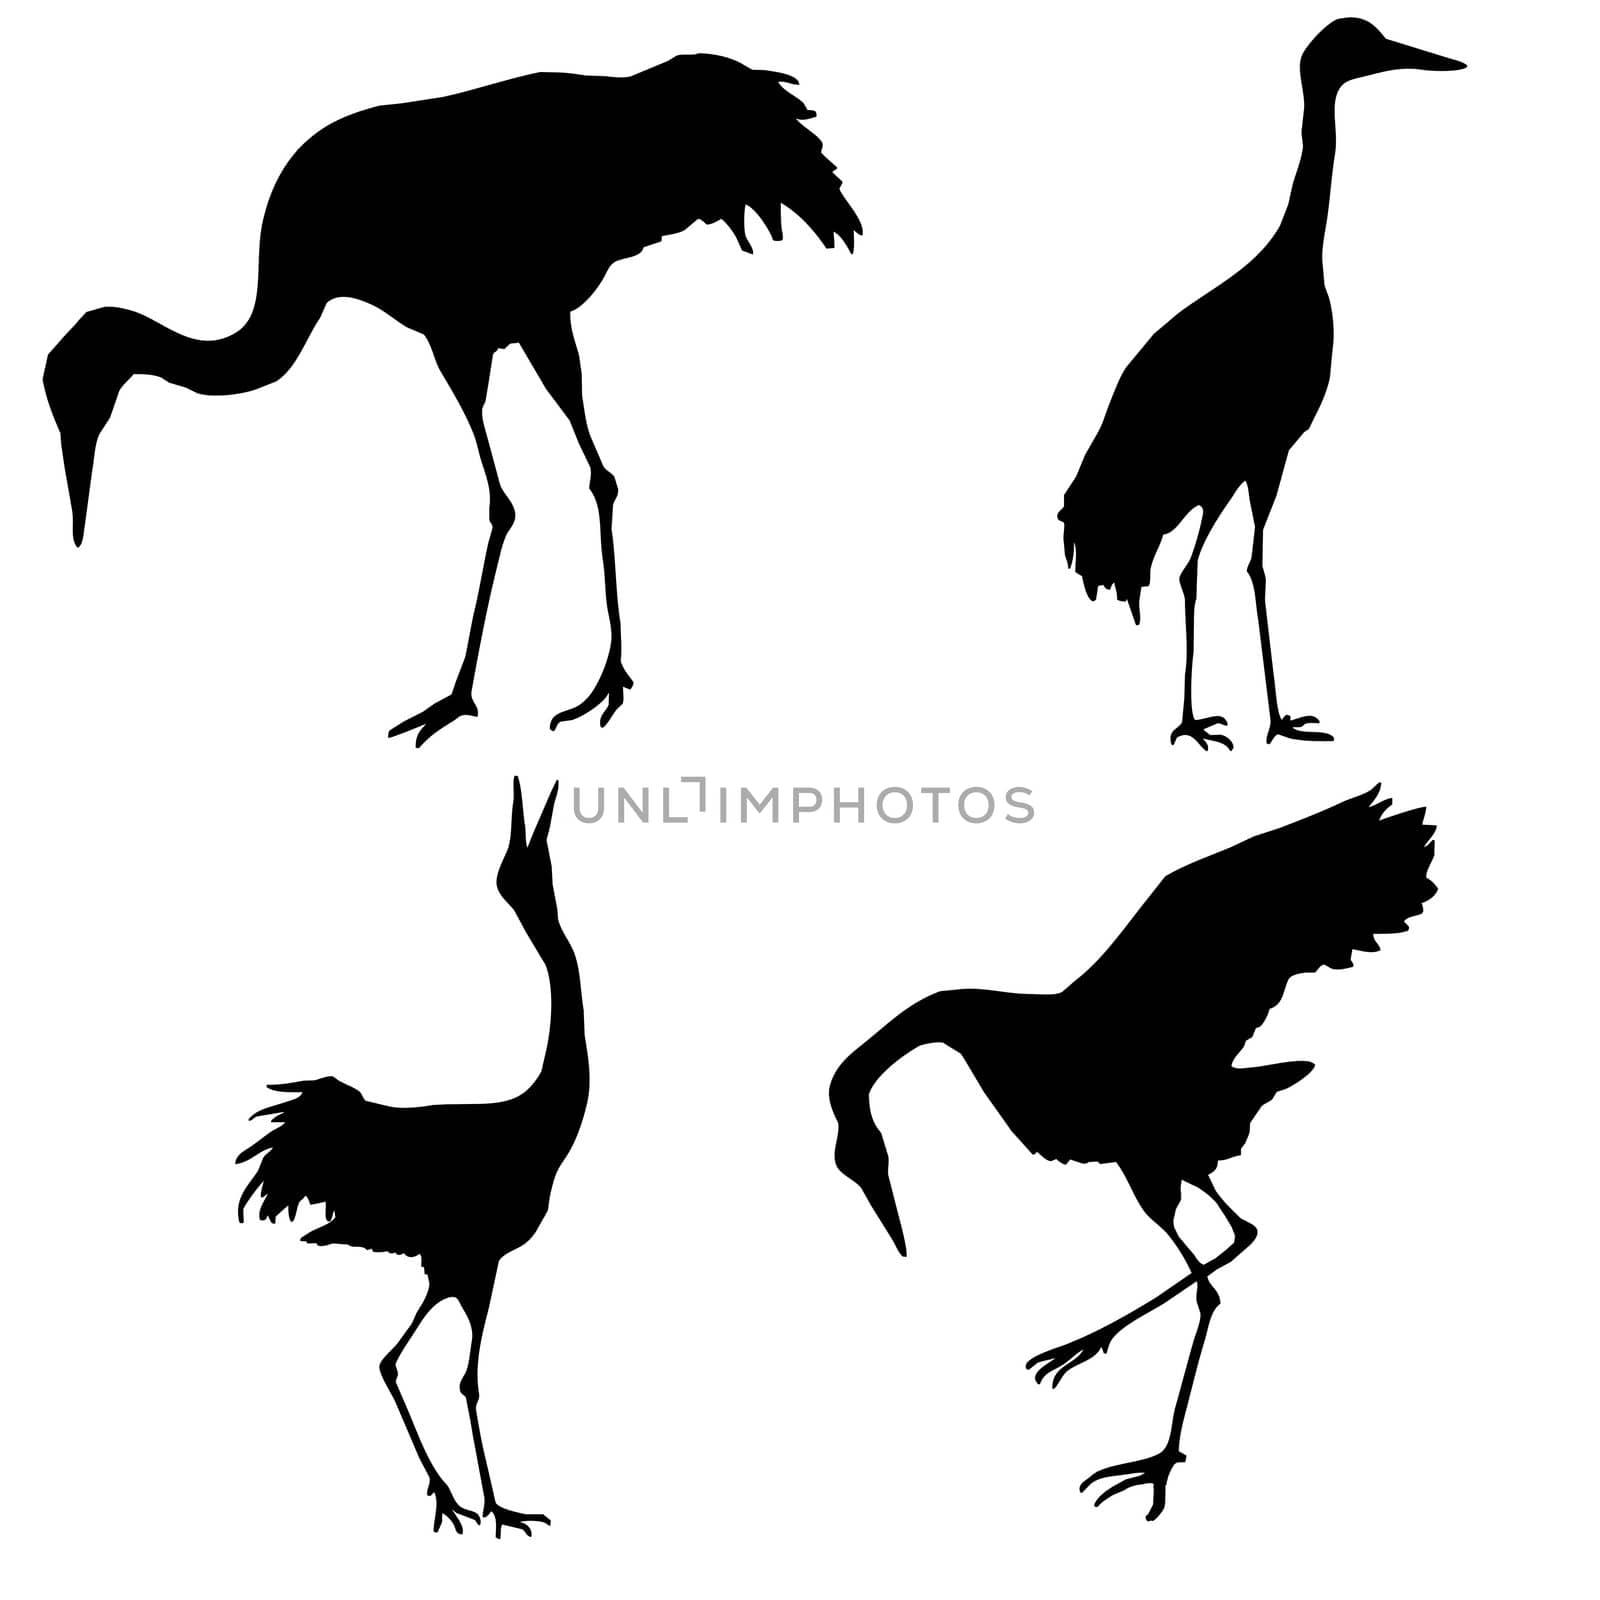 silhouette of the cranes isolated on white background